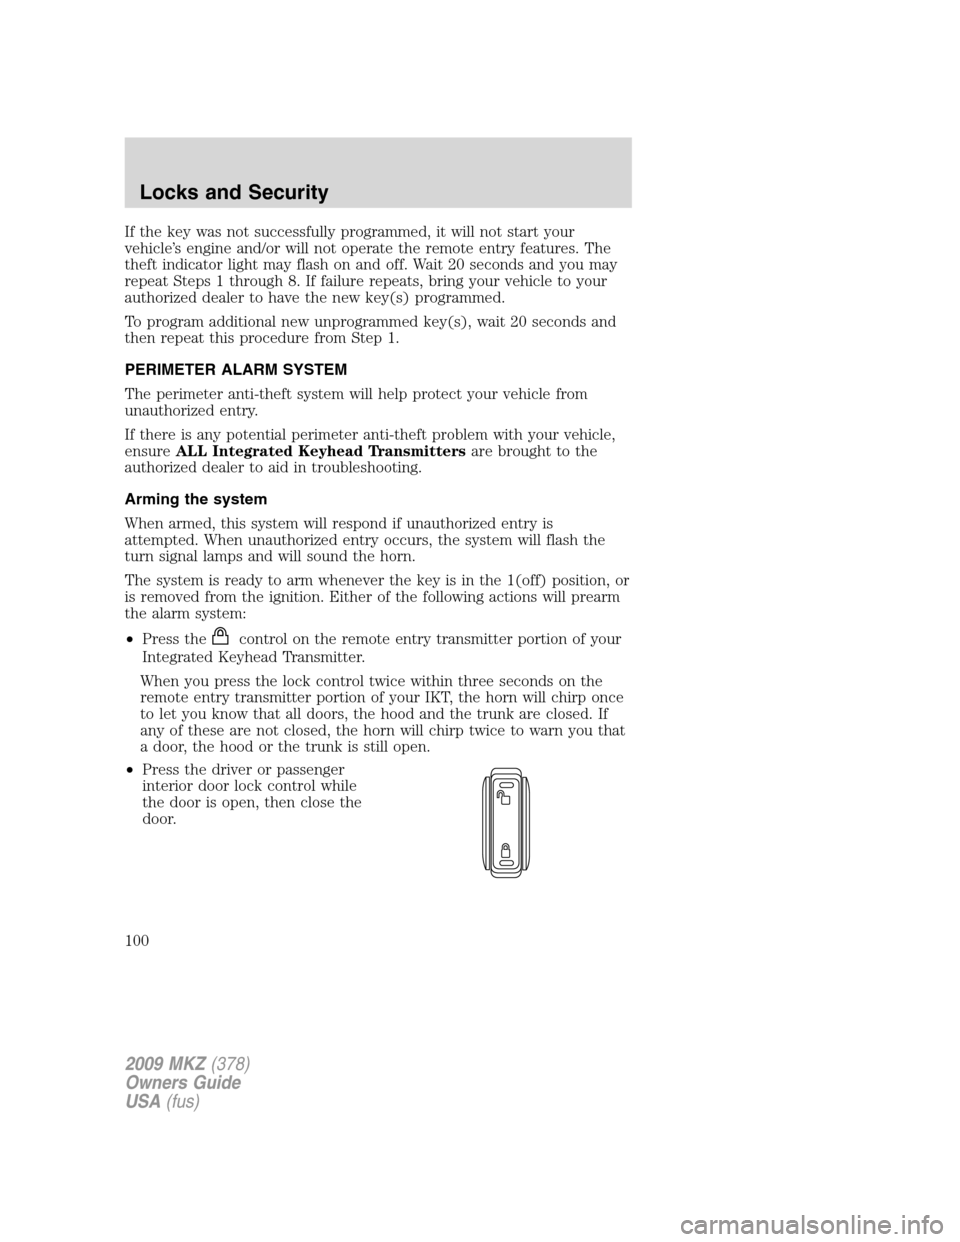 LINCOLN MKZ 2009  Owners Manual If the key was not successfully programmed, it will not start your
vehicle’s engine and/or will not operate the remote entry features. The
theft indicator light may flash on and off. Wait 20 seconds